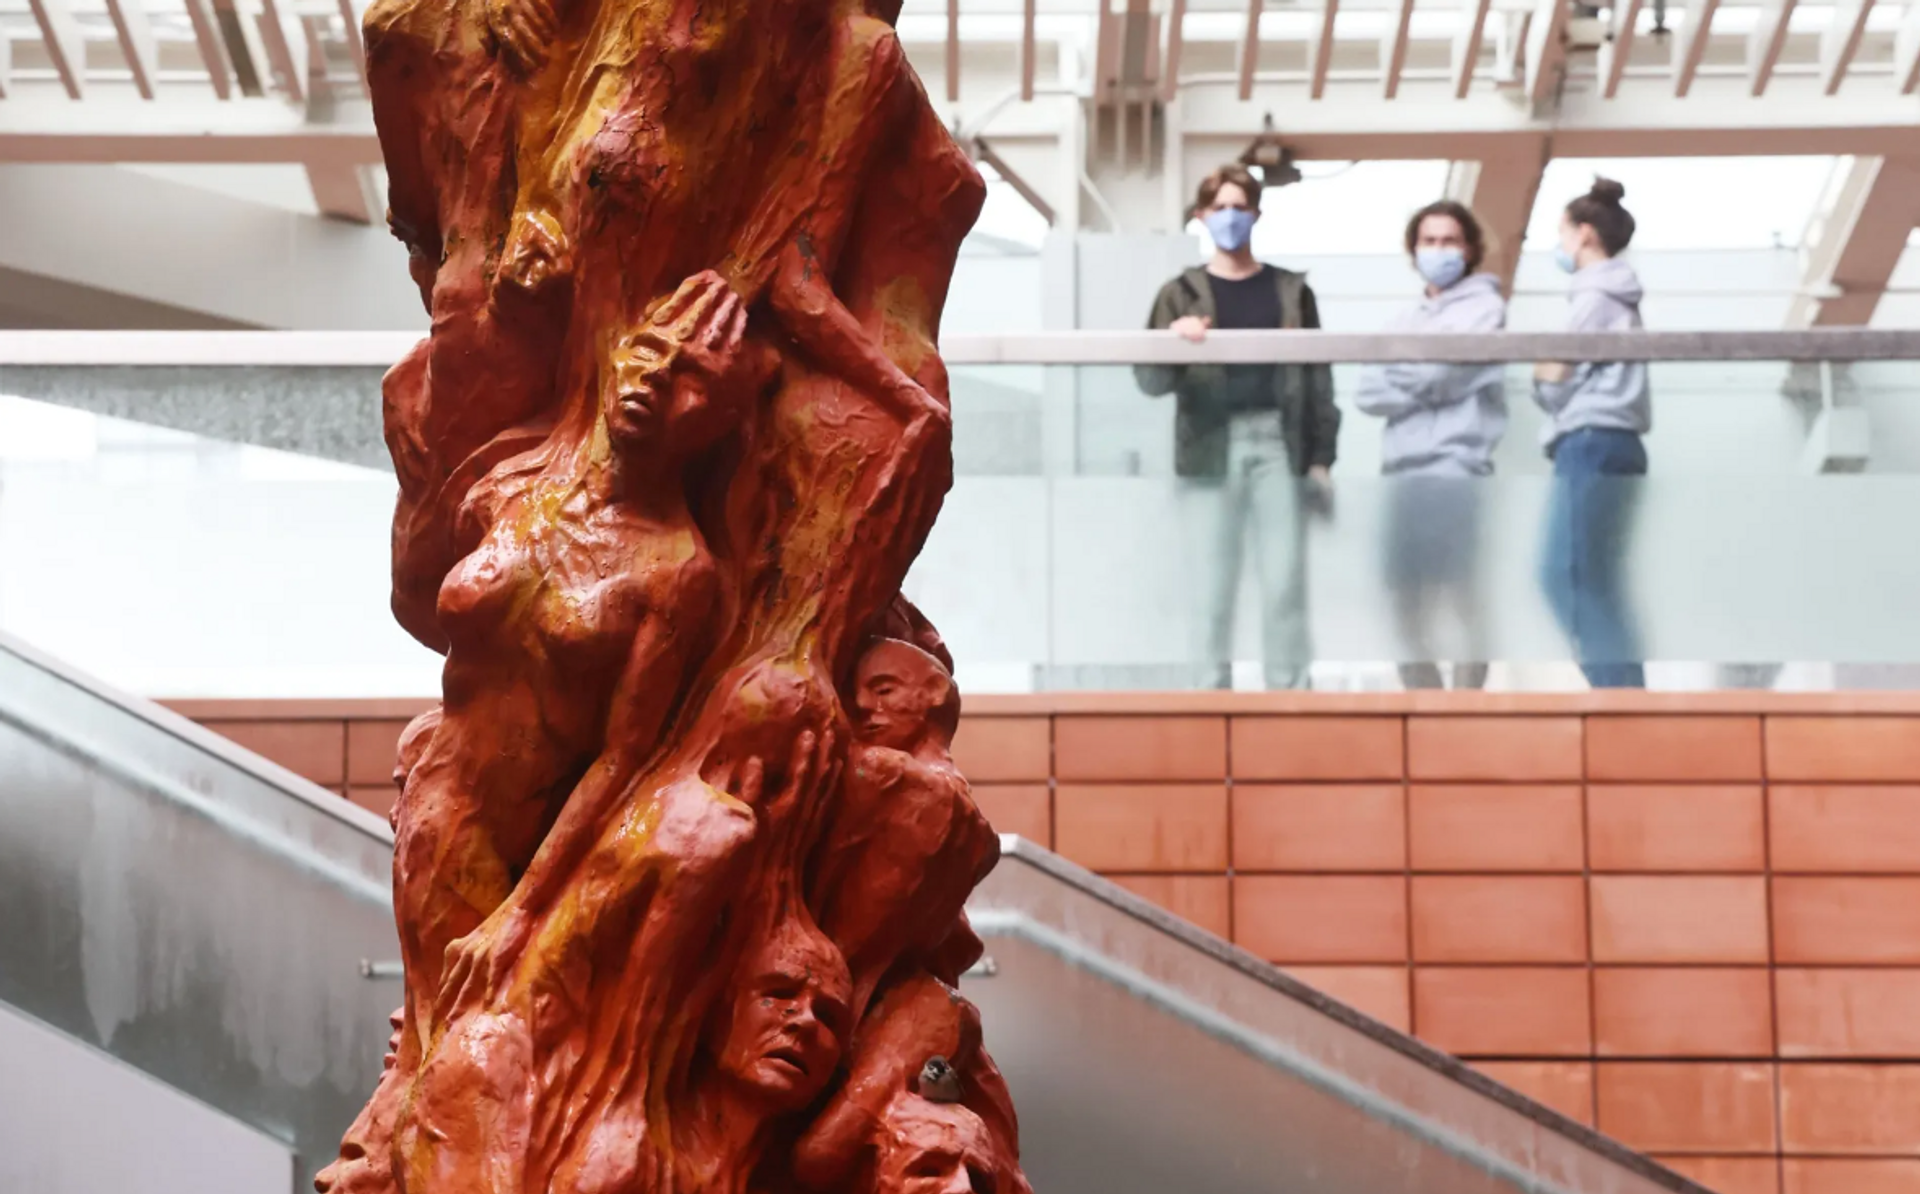 Jens Galschiøt's Pillar Of Shame (1997) was removed from the University of Hong Kong last year

Courtesy of the artist